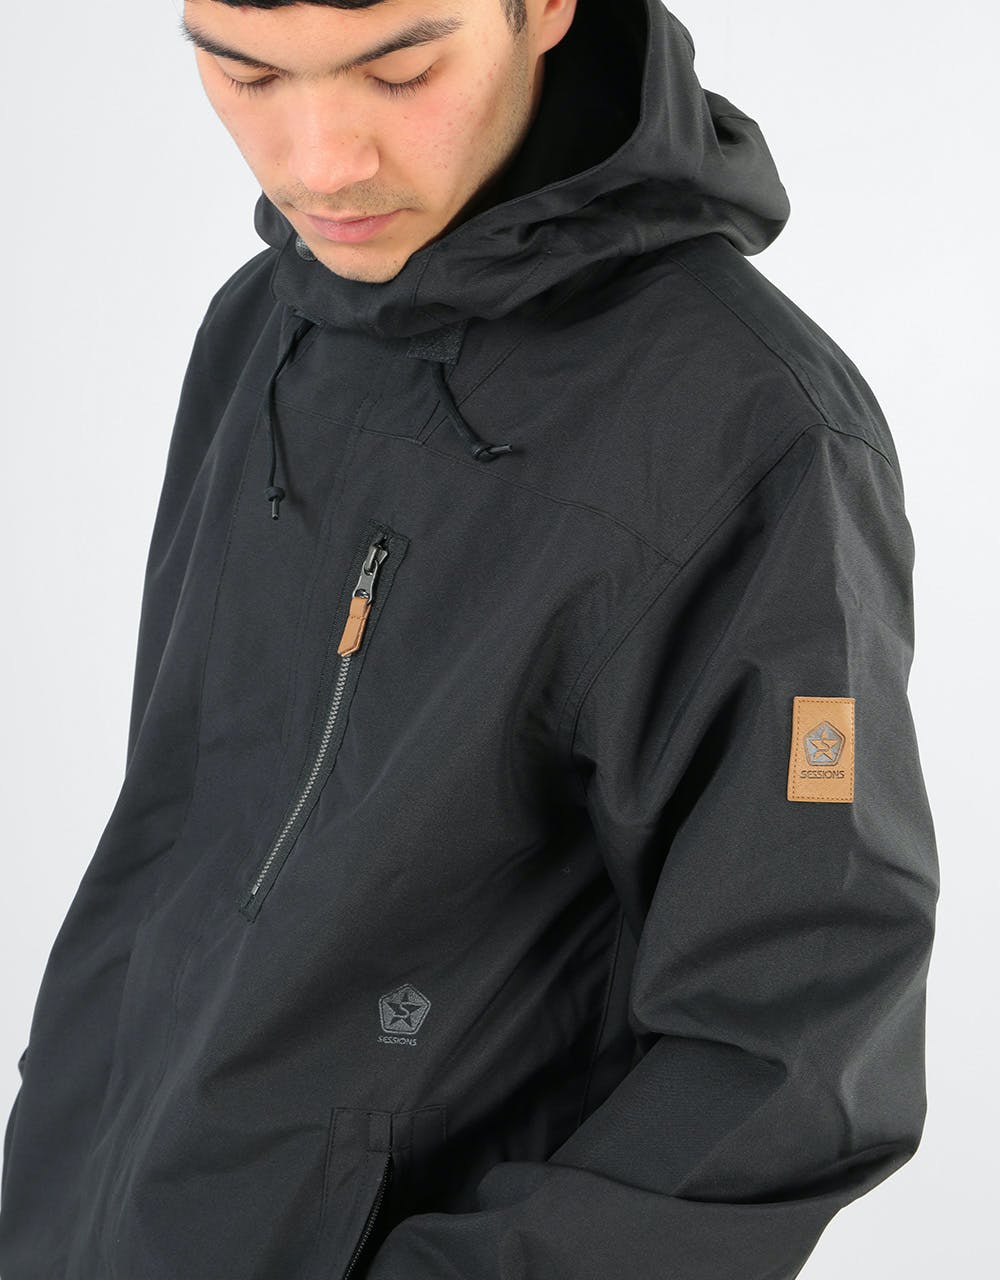 Sessions Scout Snowboard Jacket - Black